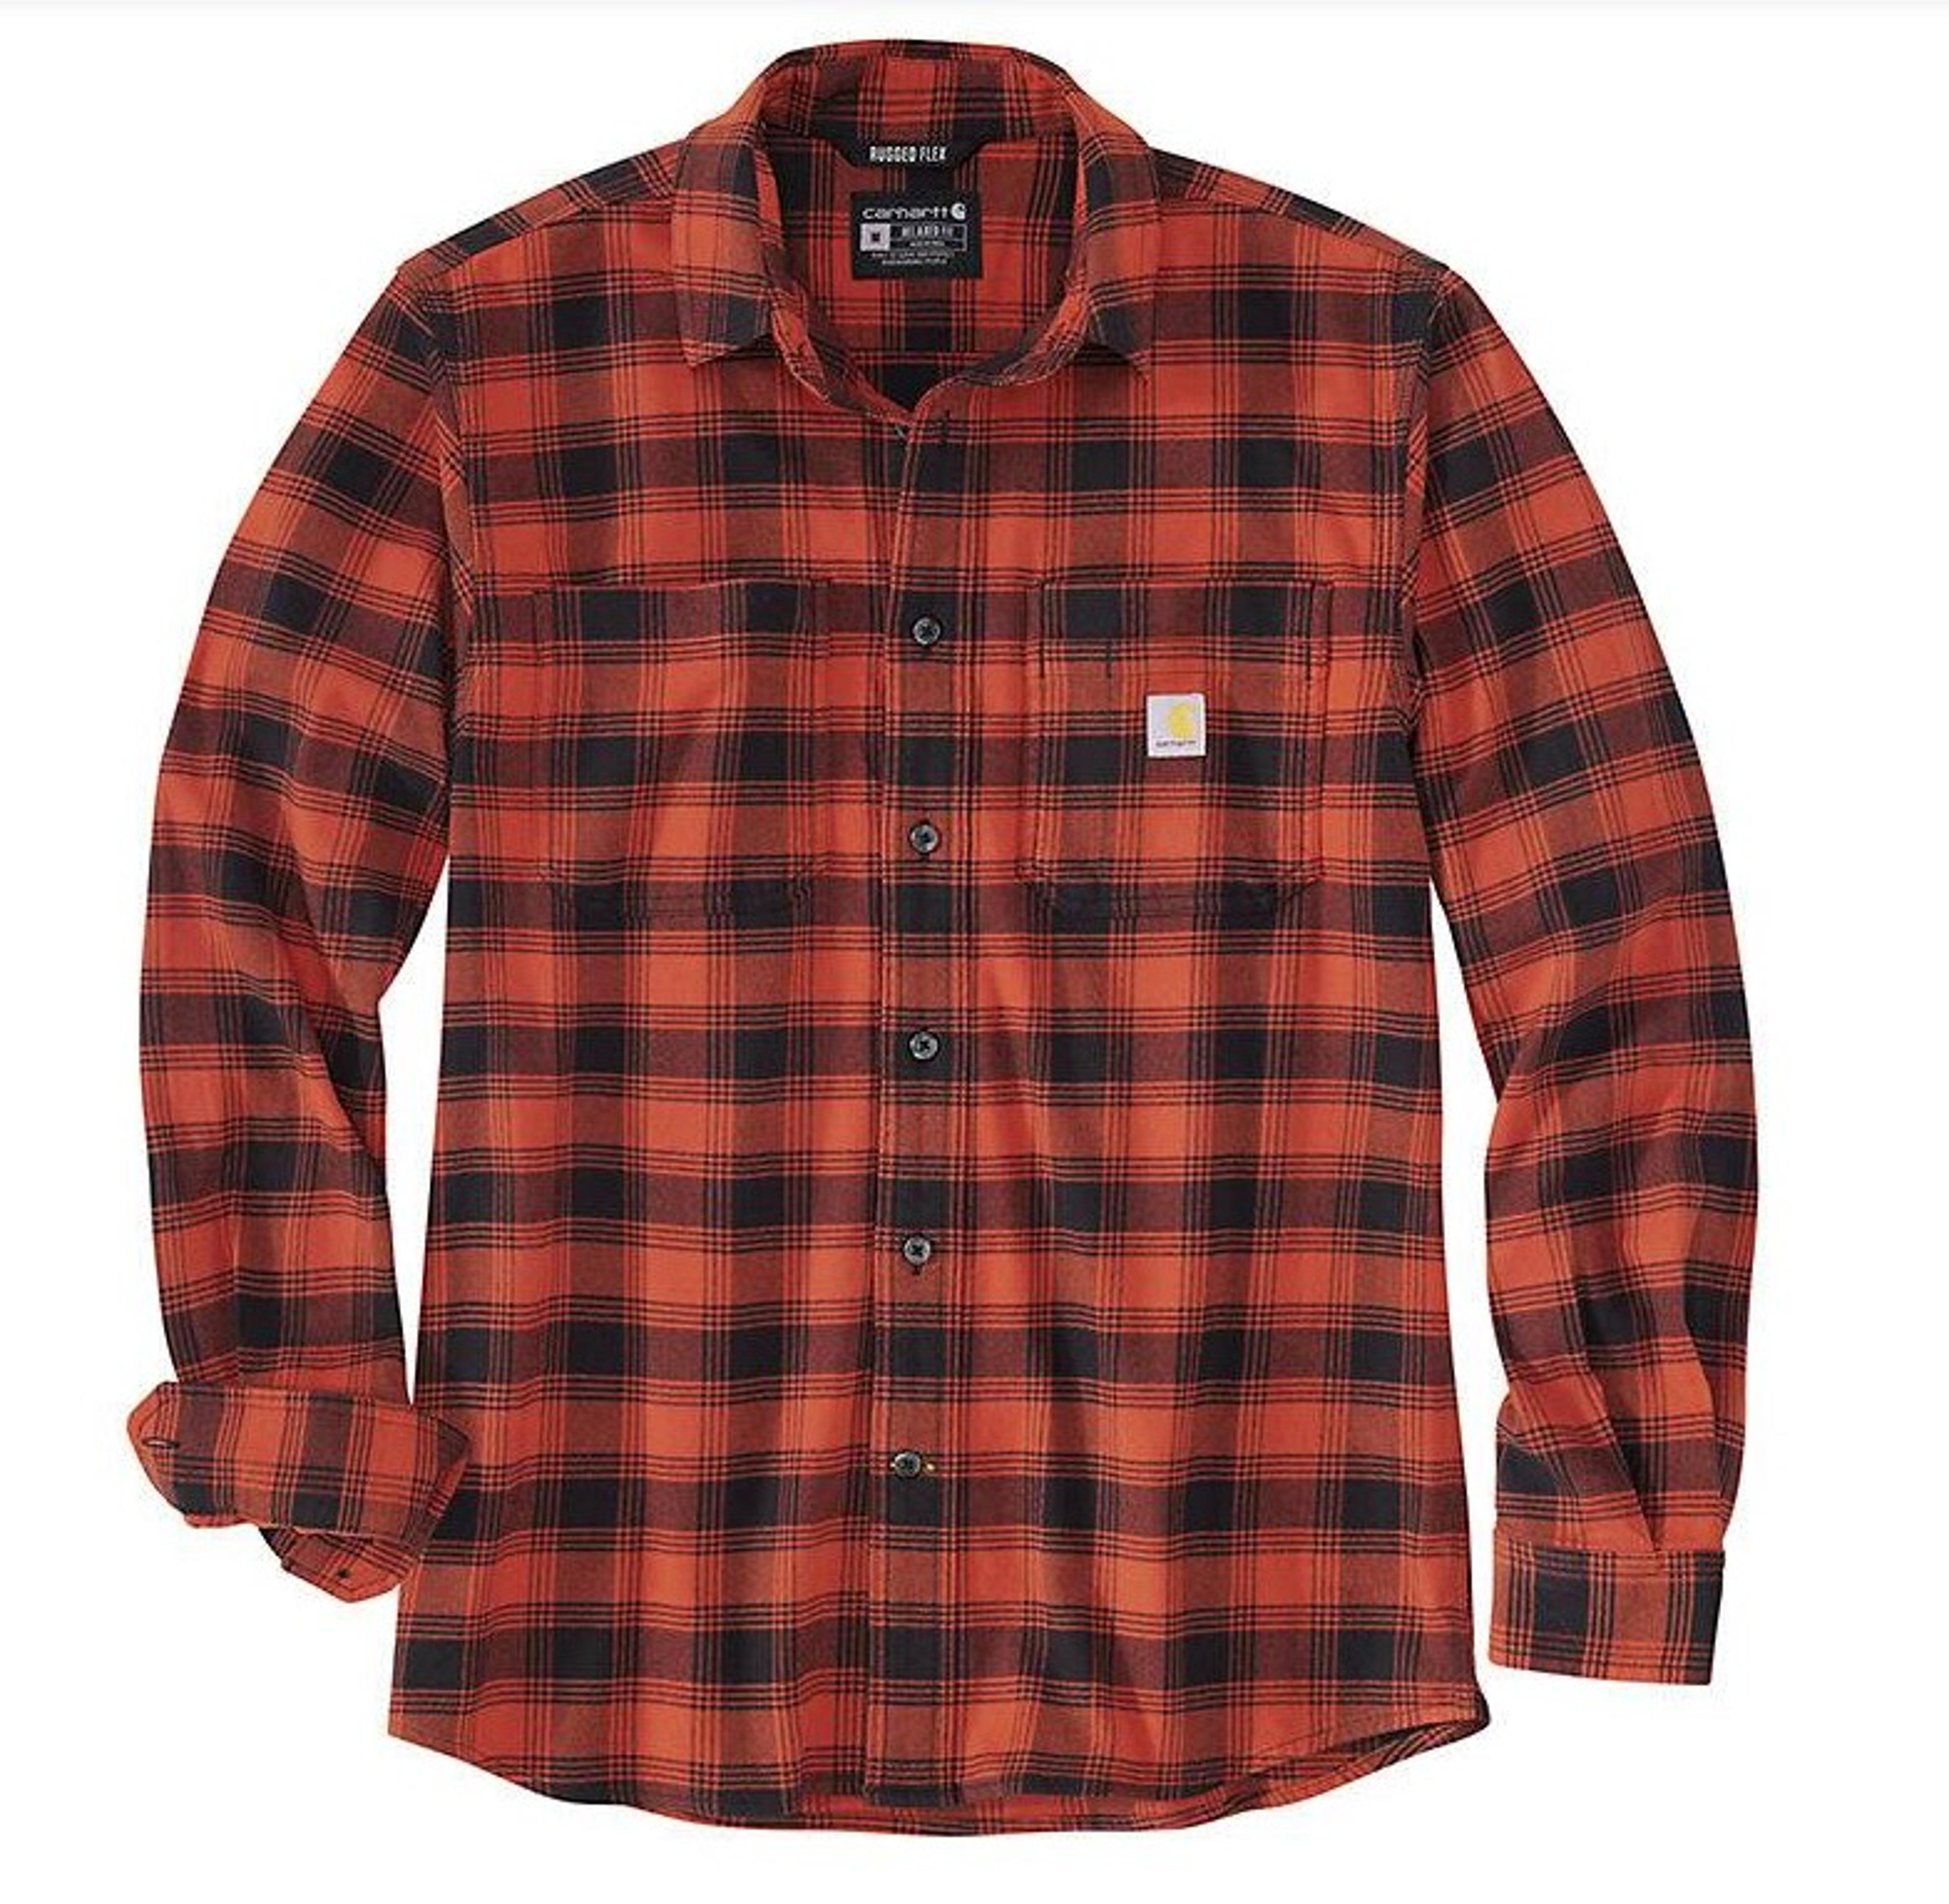  Relaxed Fit Midweight Flannel Long- Sleeve Plaid Shirt